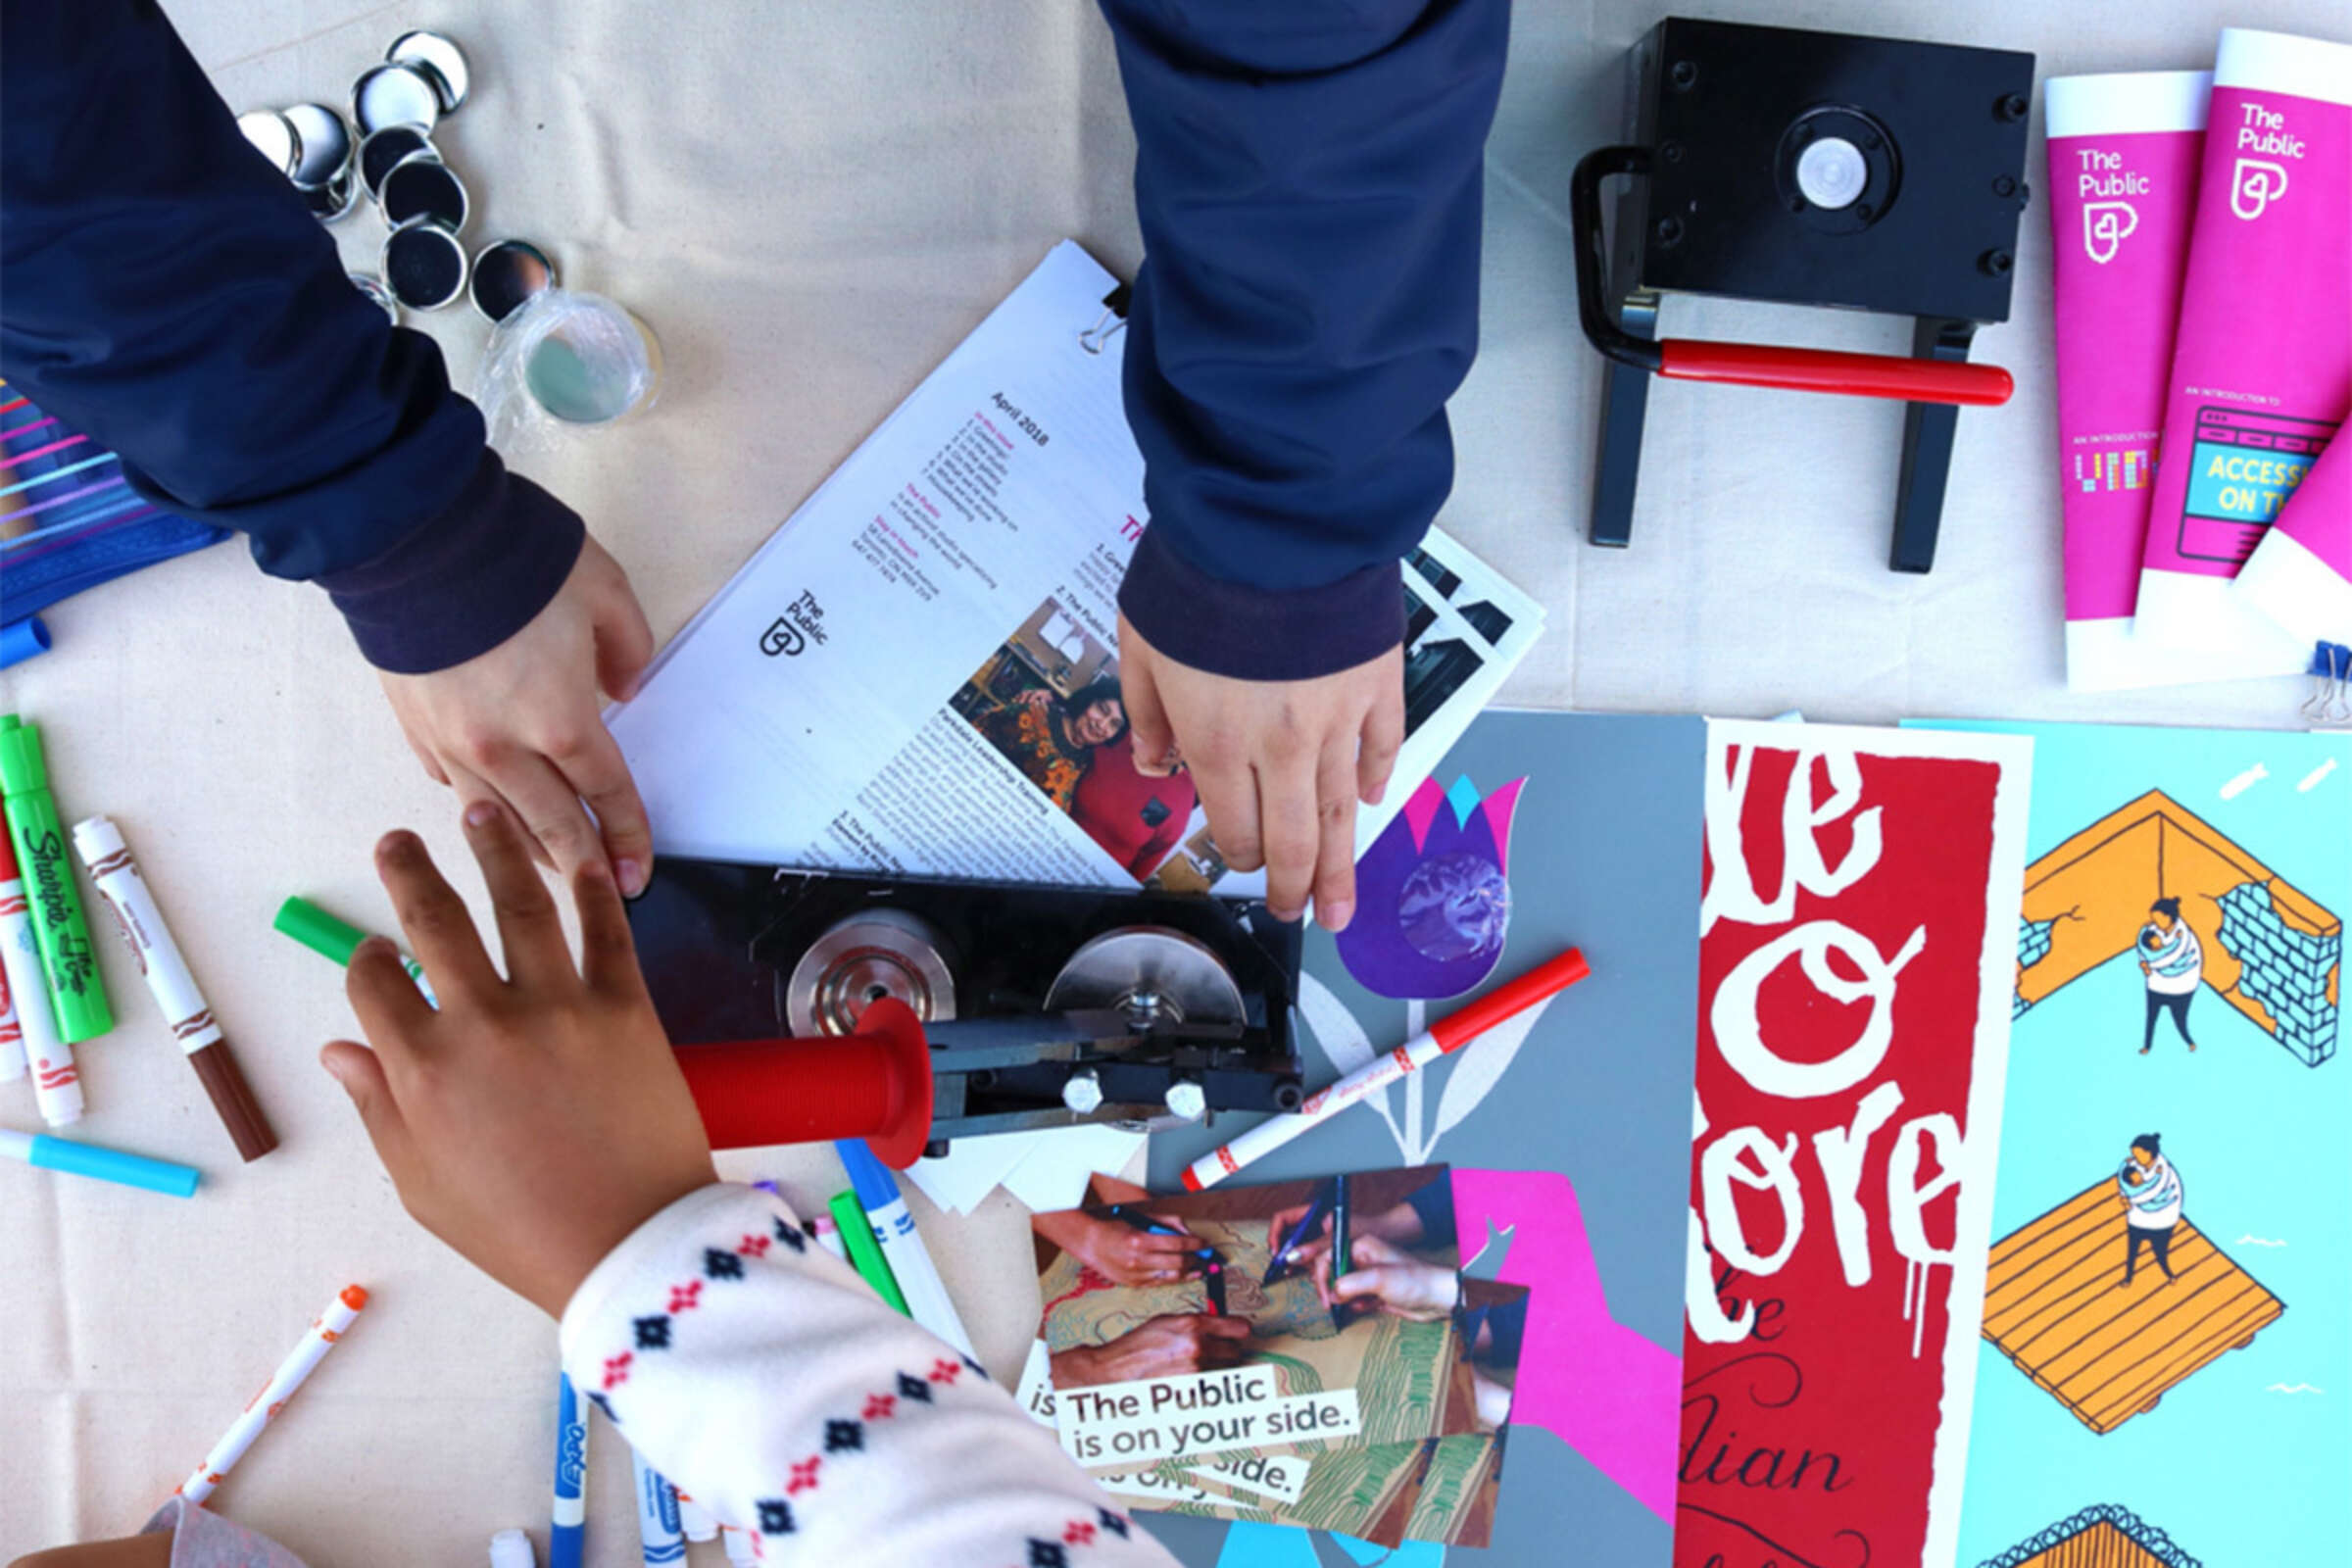 Top-down view of a table filled with art supplies and papers. Several hands are actively engaged in cutting, arranging, and working on colorful projects. The table features markers, scissors, tape, pamphlets, and craft materials.